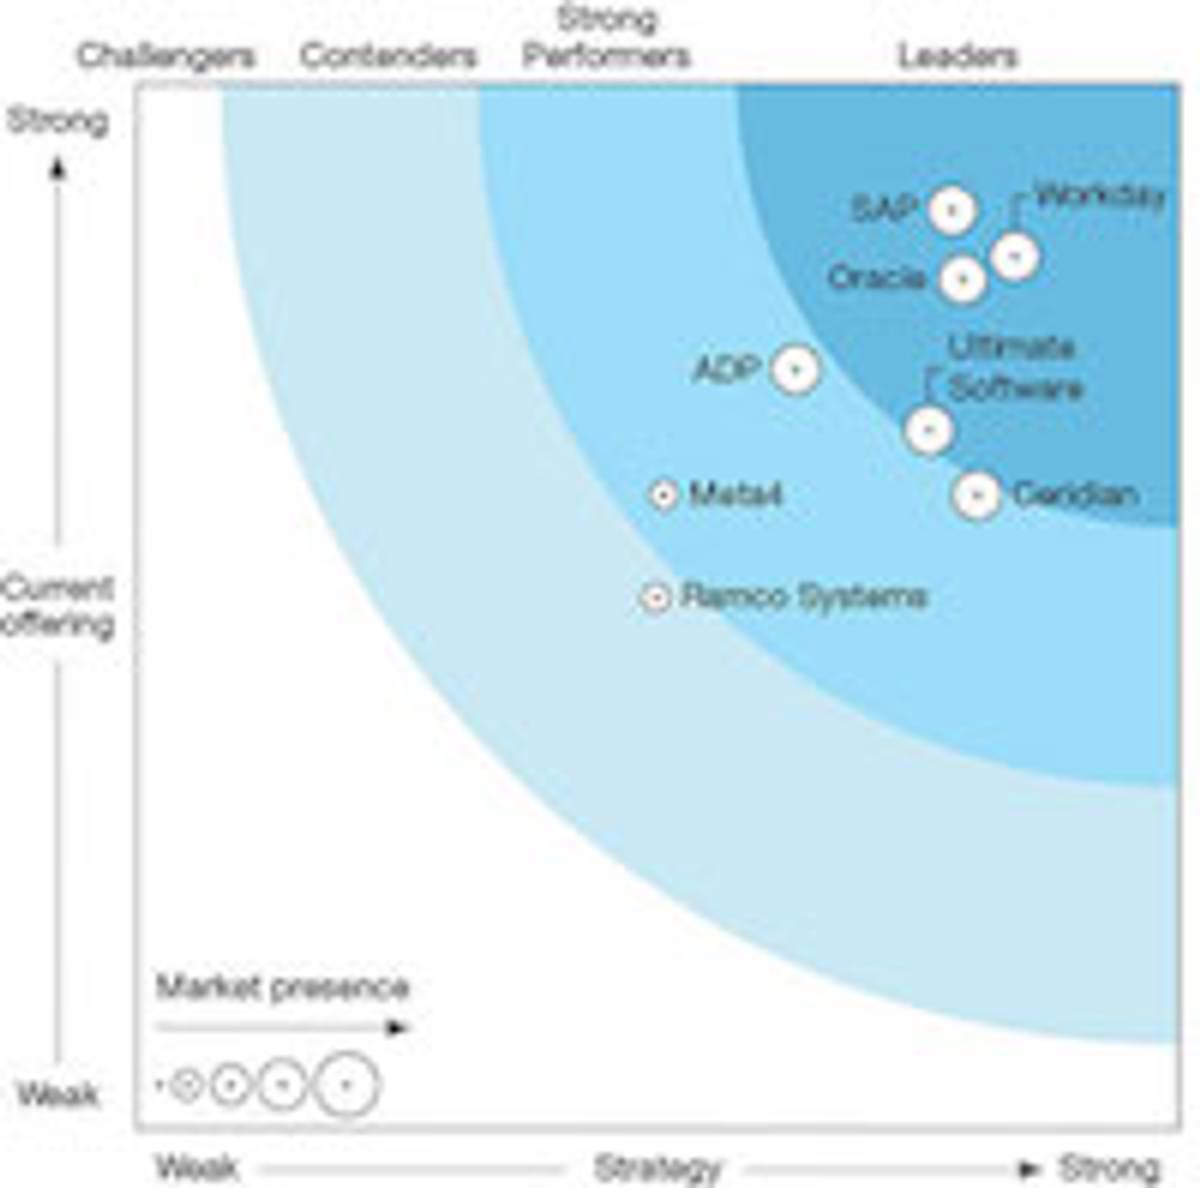 Workday is Leader SaaS Human Resource Management Systems Report image